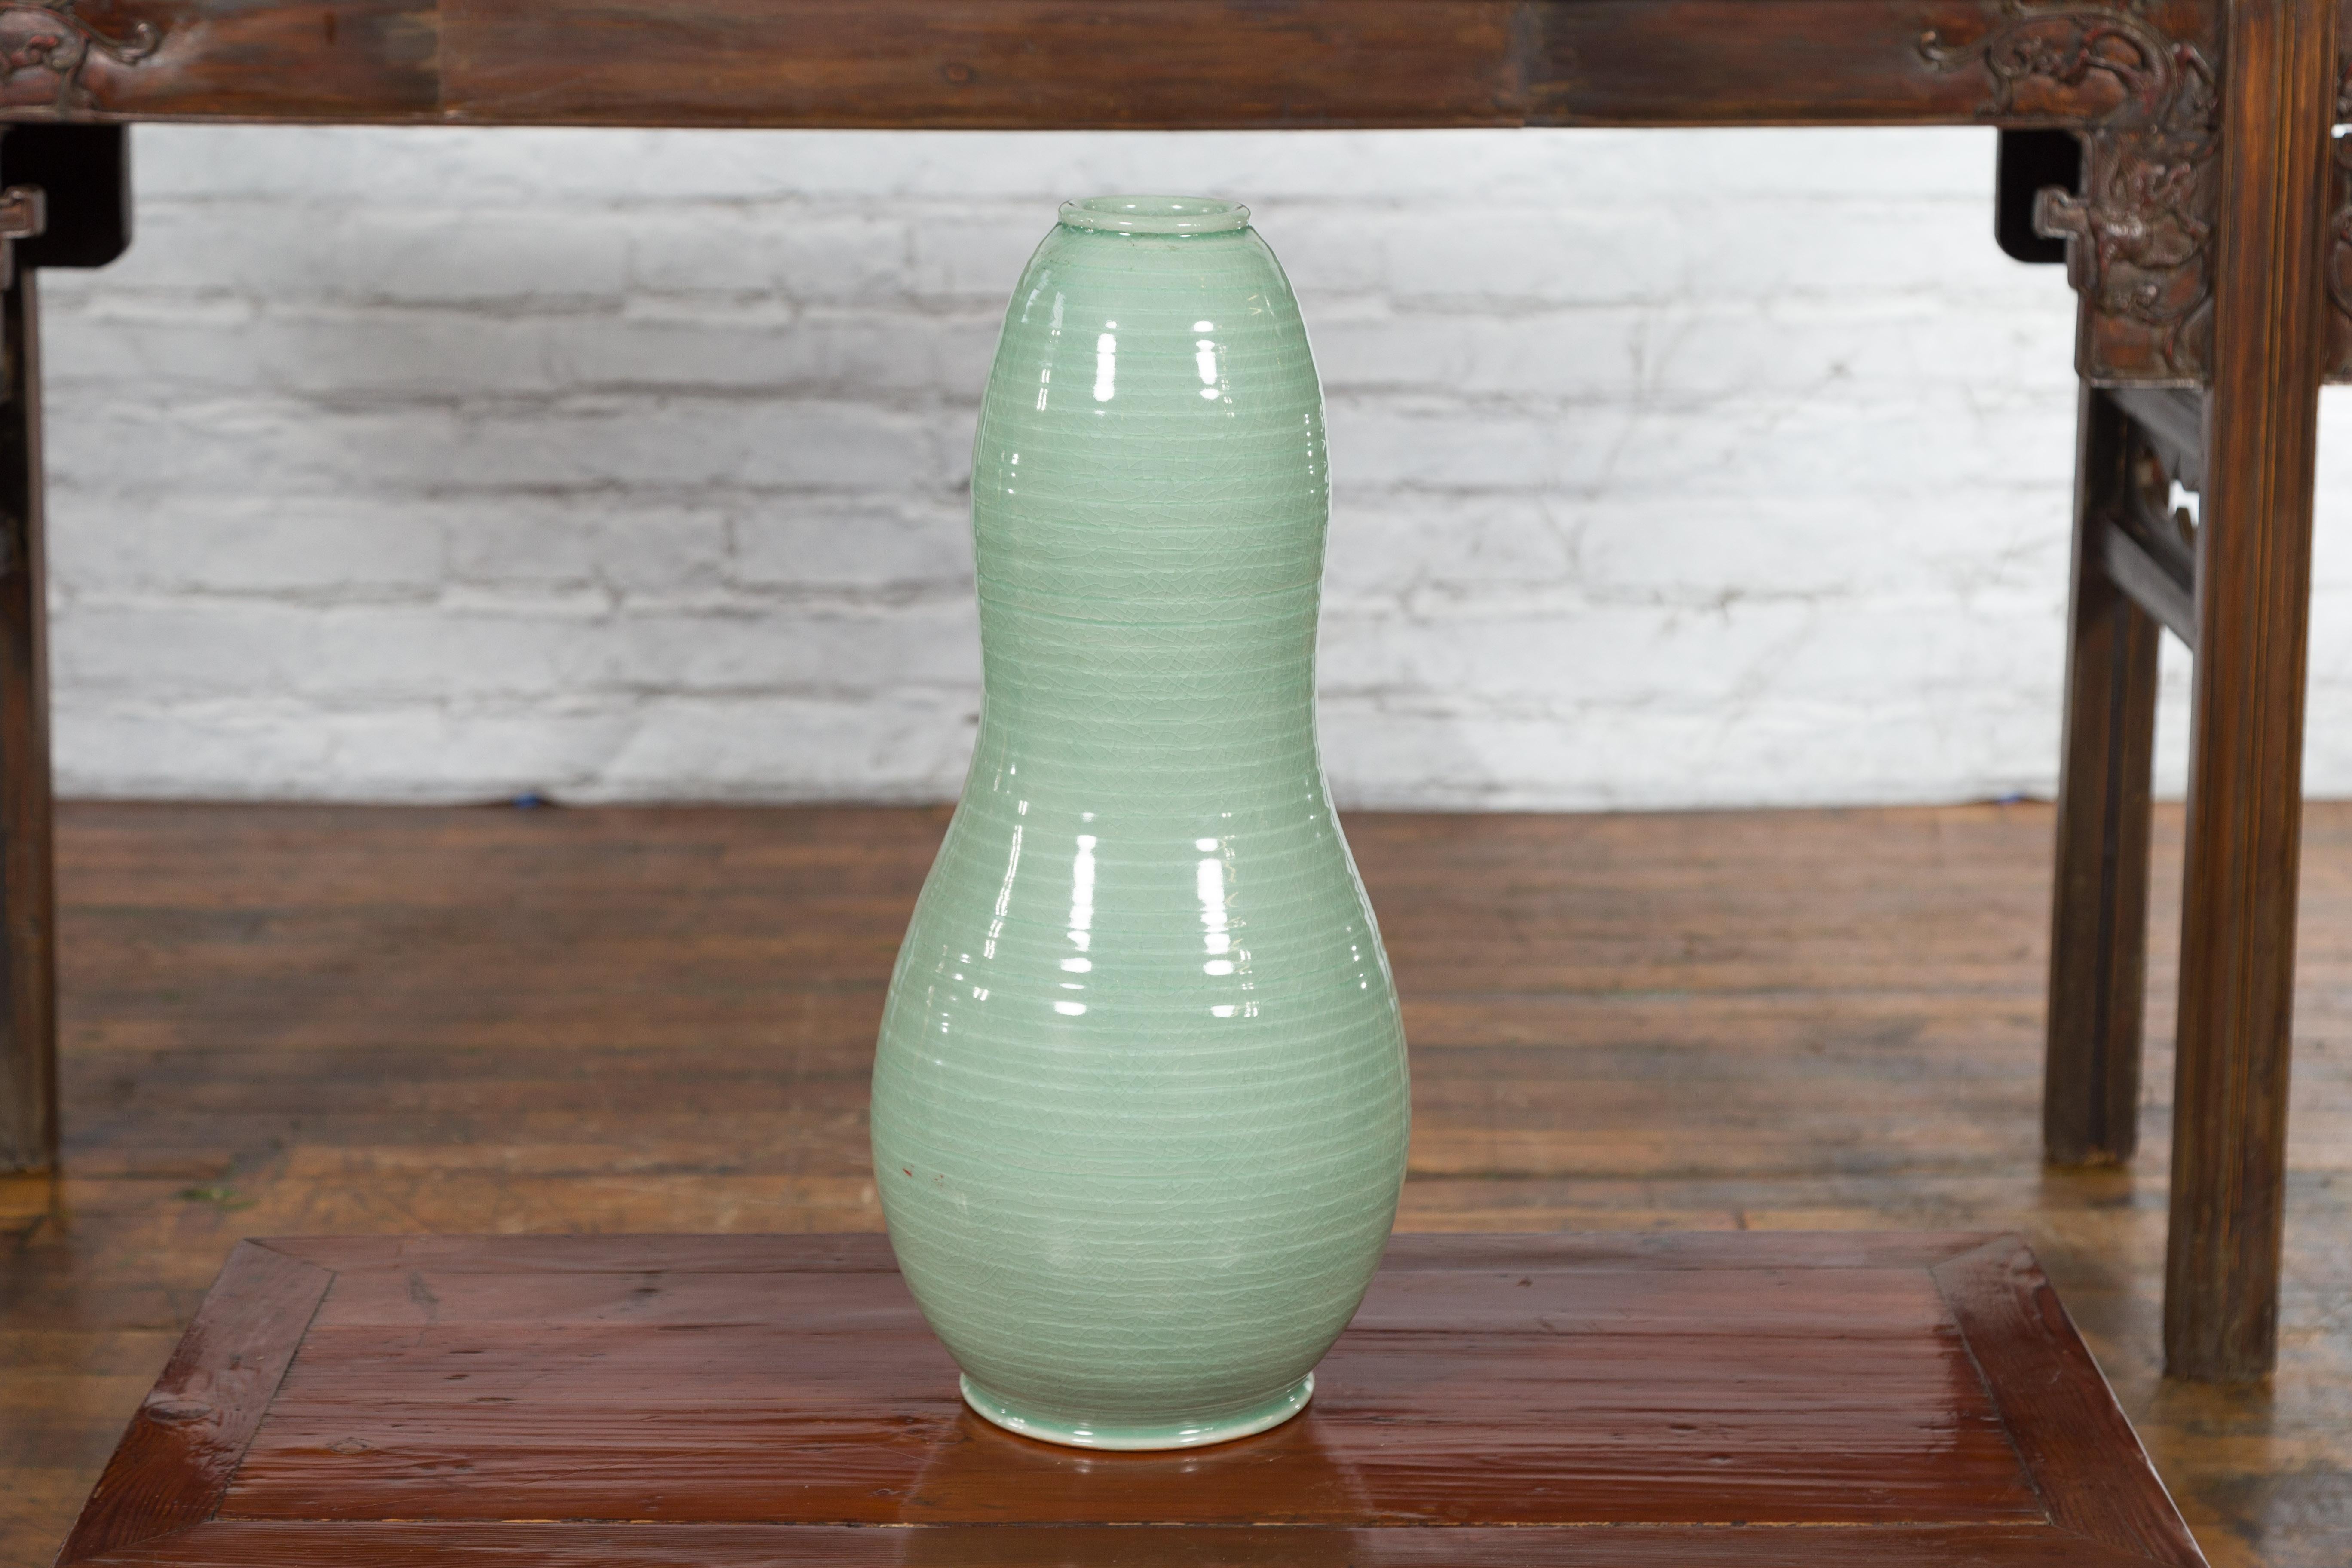 A large contemporary Northern Thai gourd-shaped vase from the Prem Collection, with green glaze. Charming our eye with its generous lines and soft color, this vase was created in Chiang Mai, northern Thailand. Showcasing concentric patterns adorning